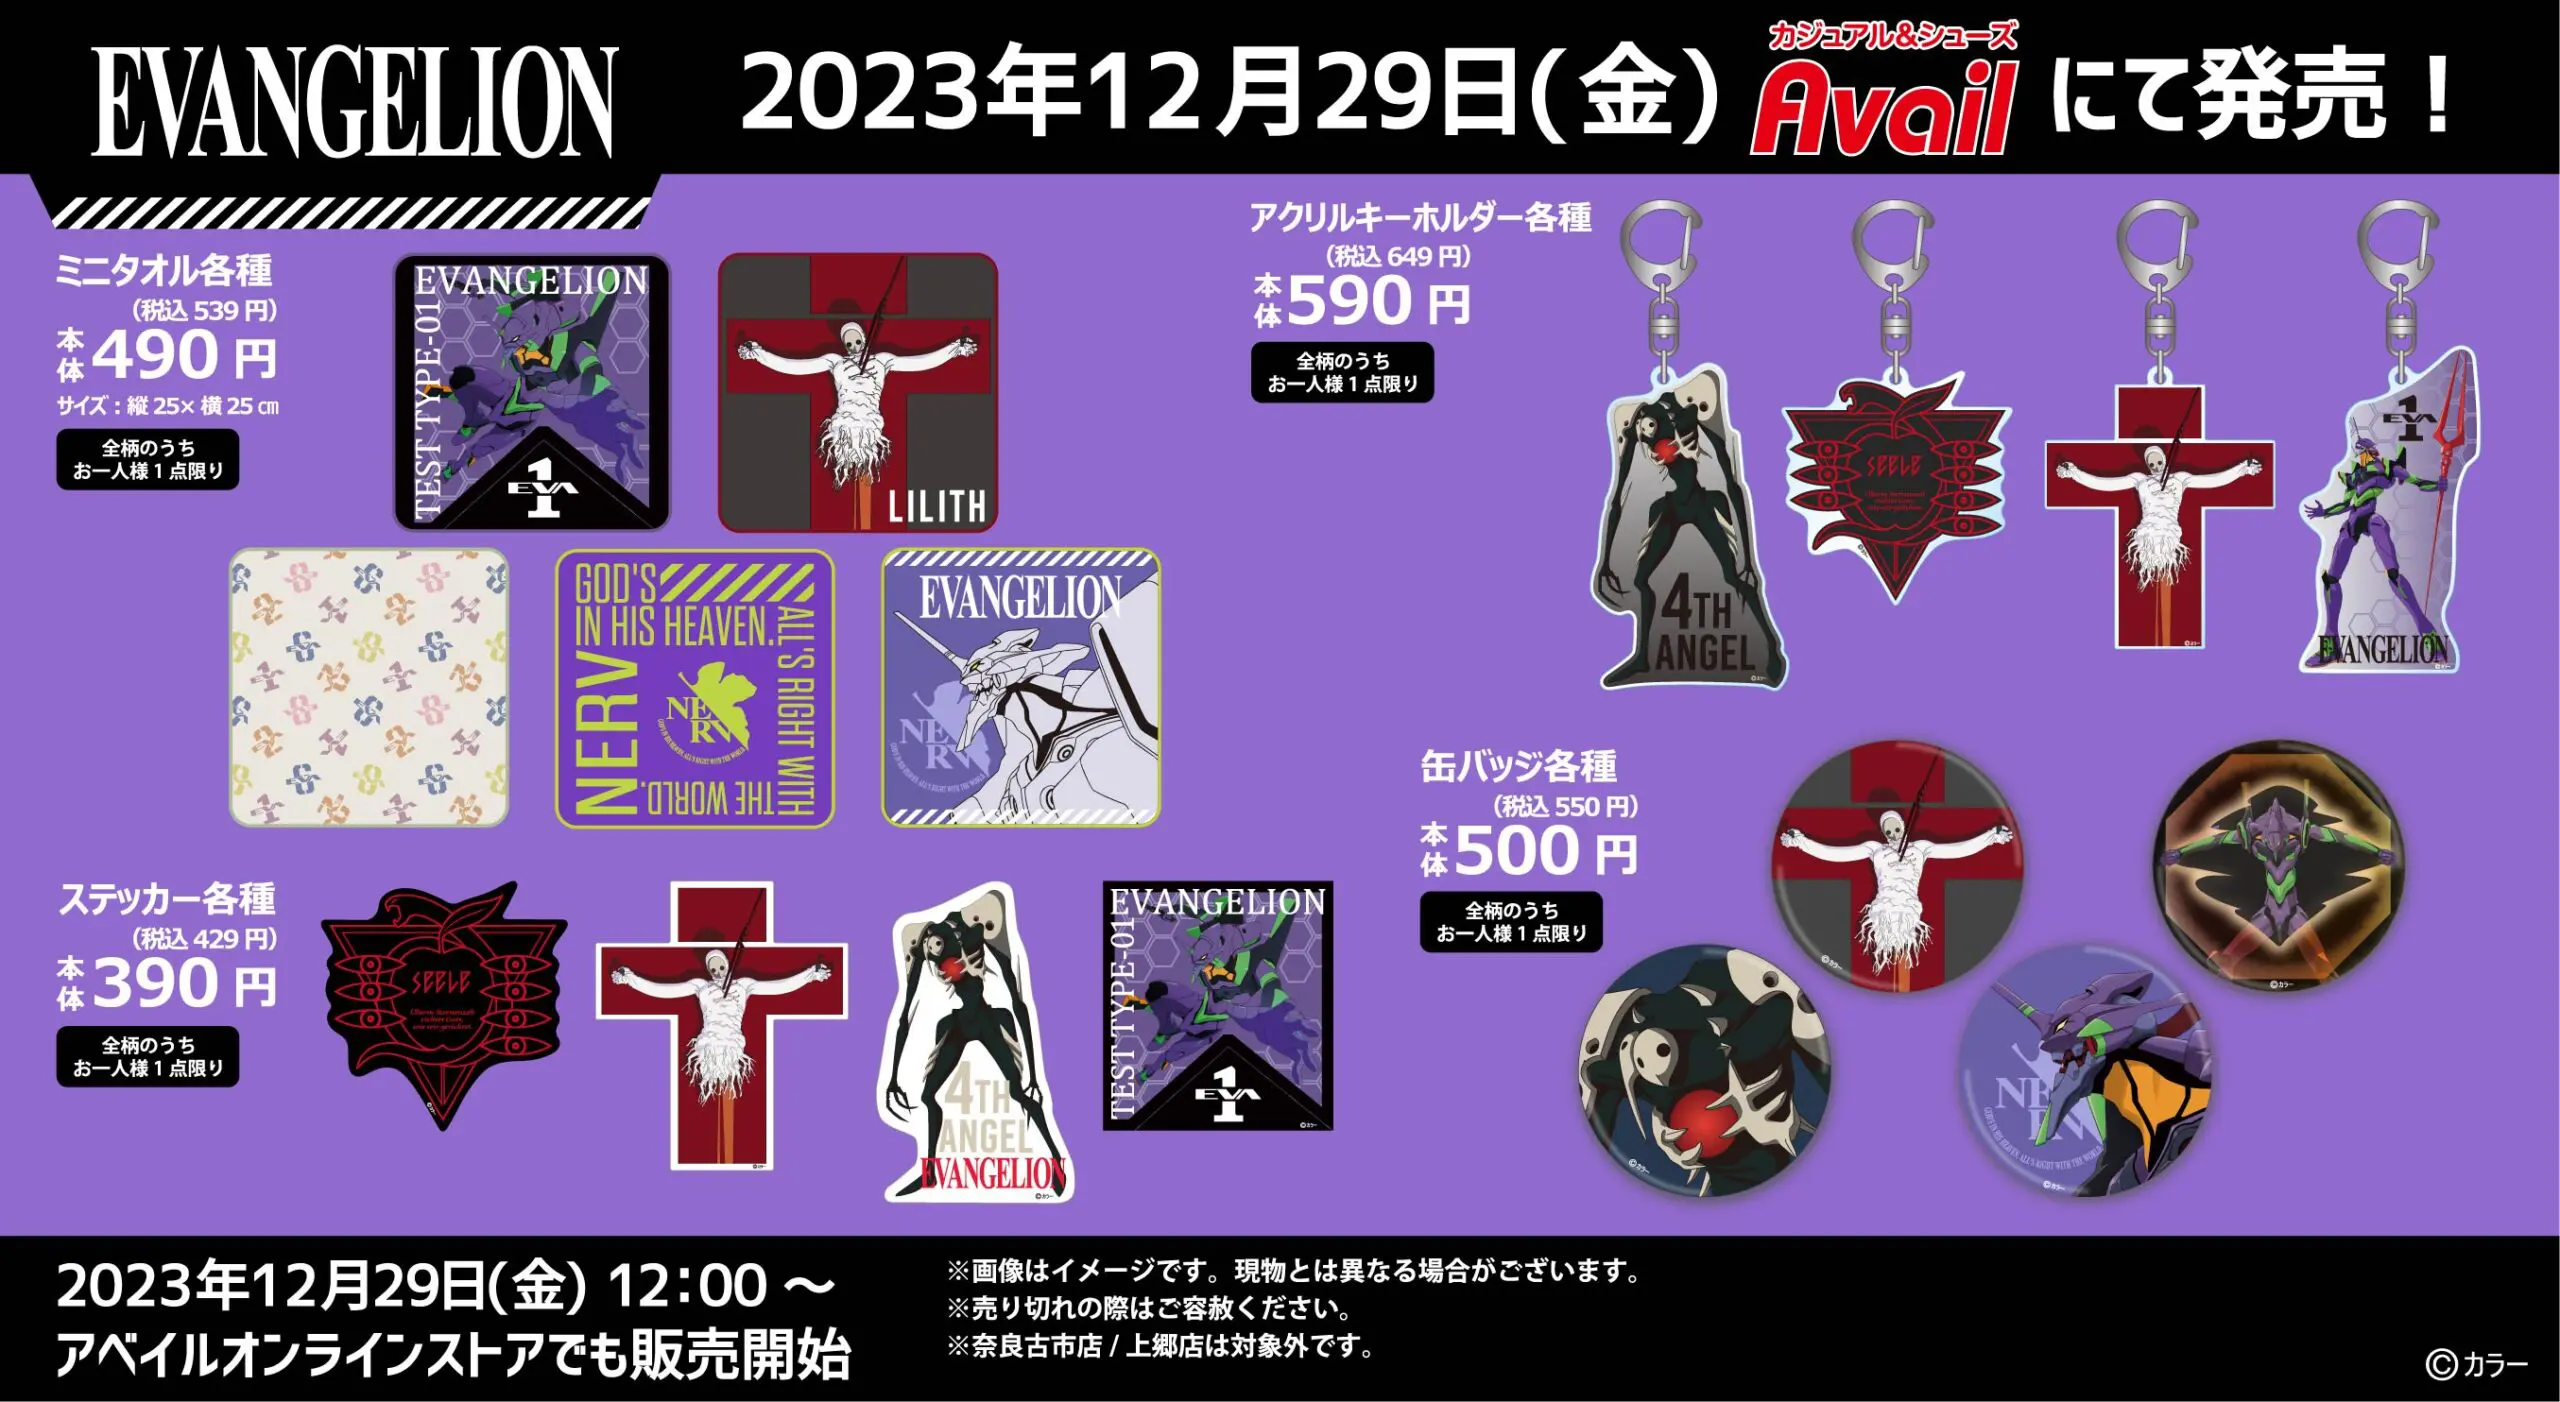 Evangelion Avail accessories 2 - towels, stickers, keychains, badges